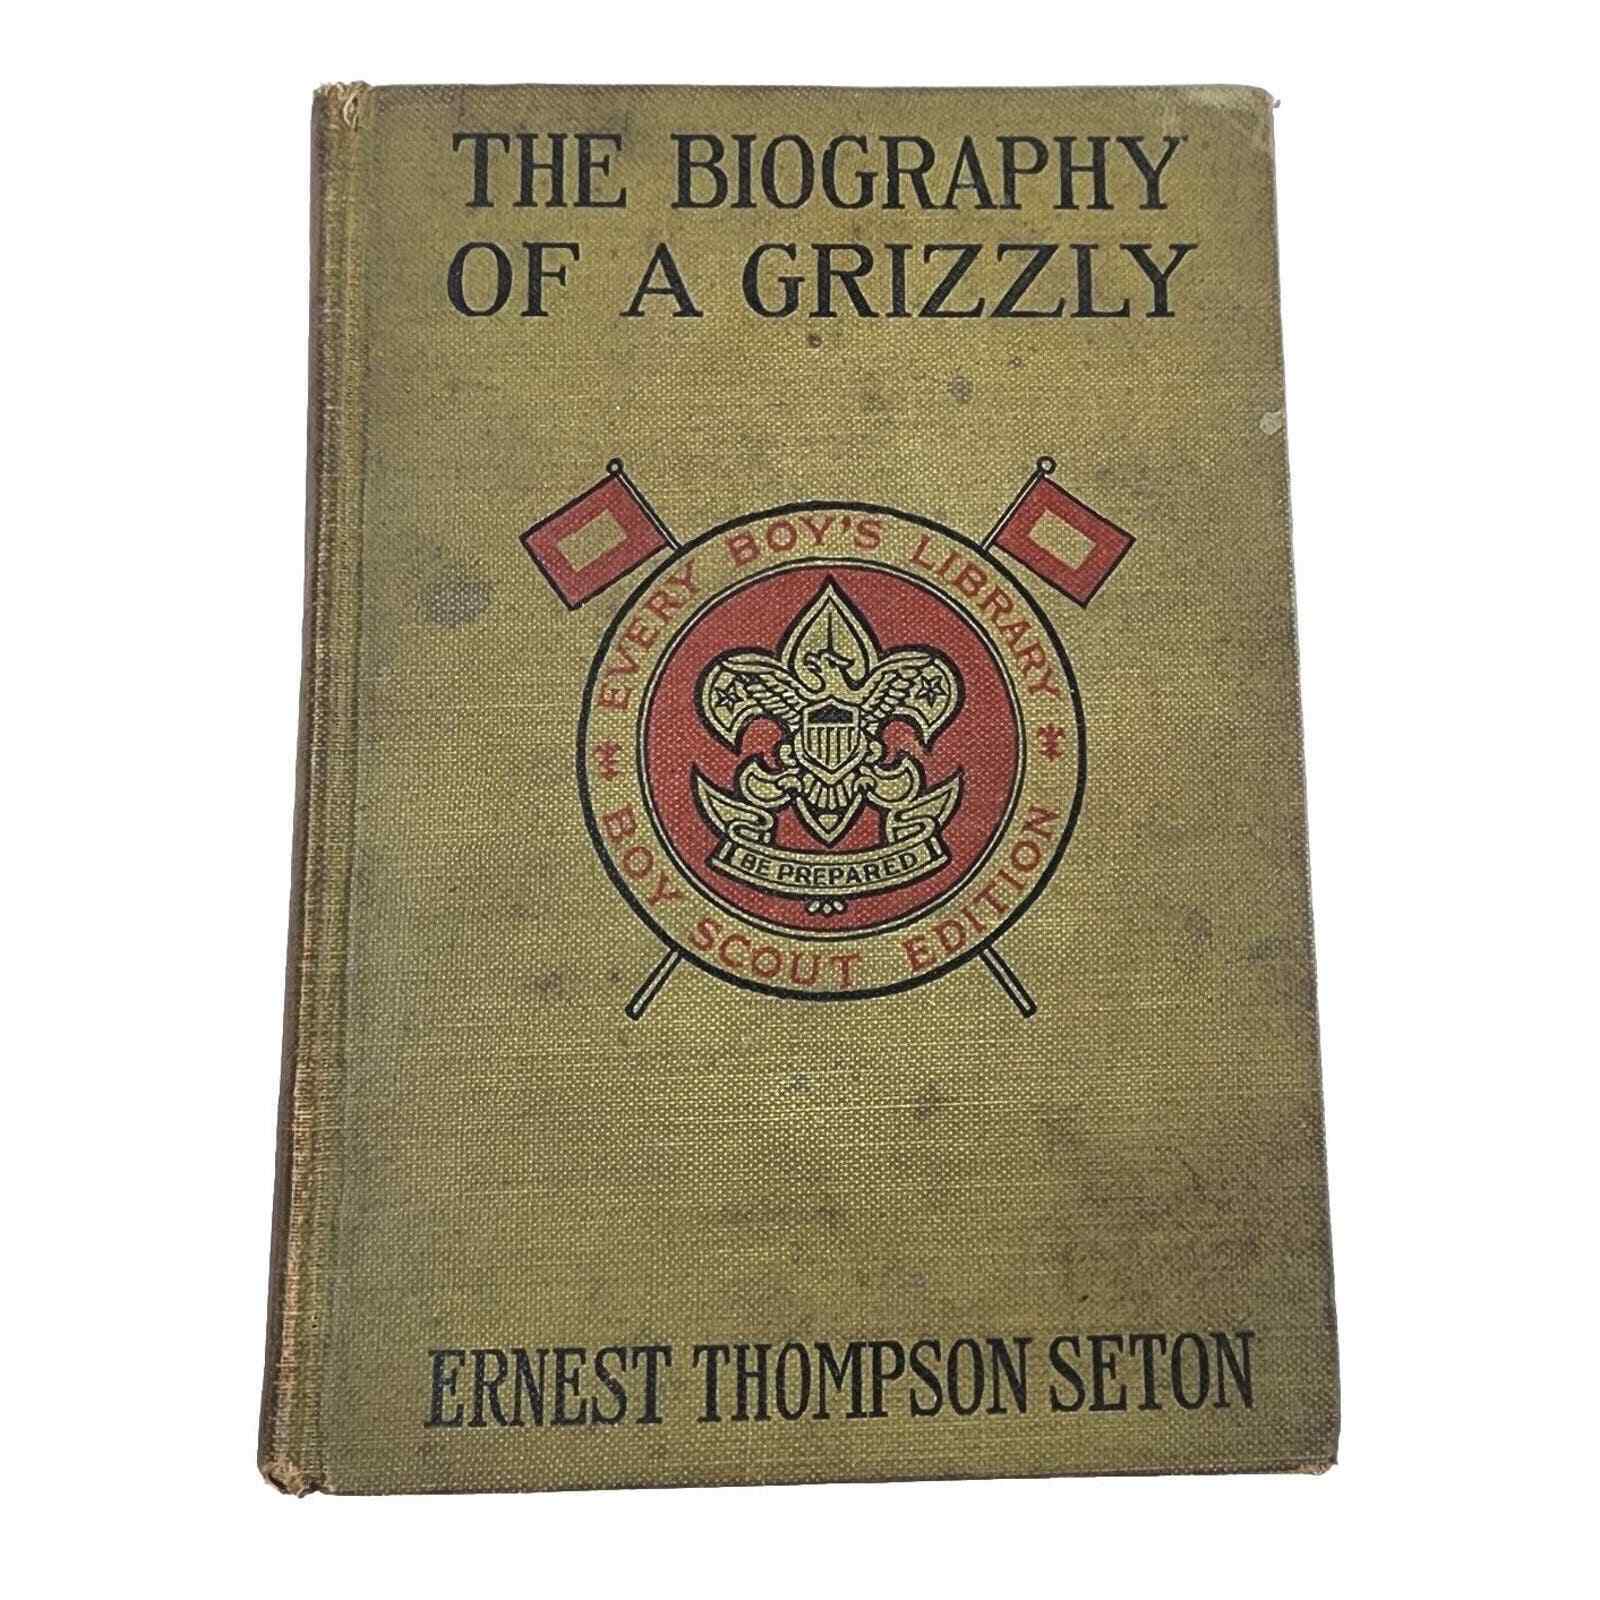 Antique Book 1919, Boy Scouts, Biography of a Grizzly by Ernest Thompson Seton